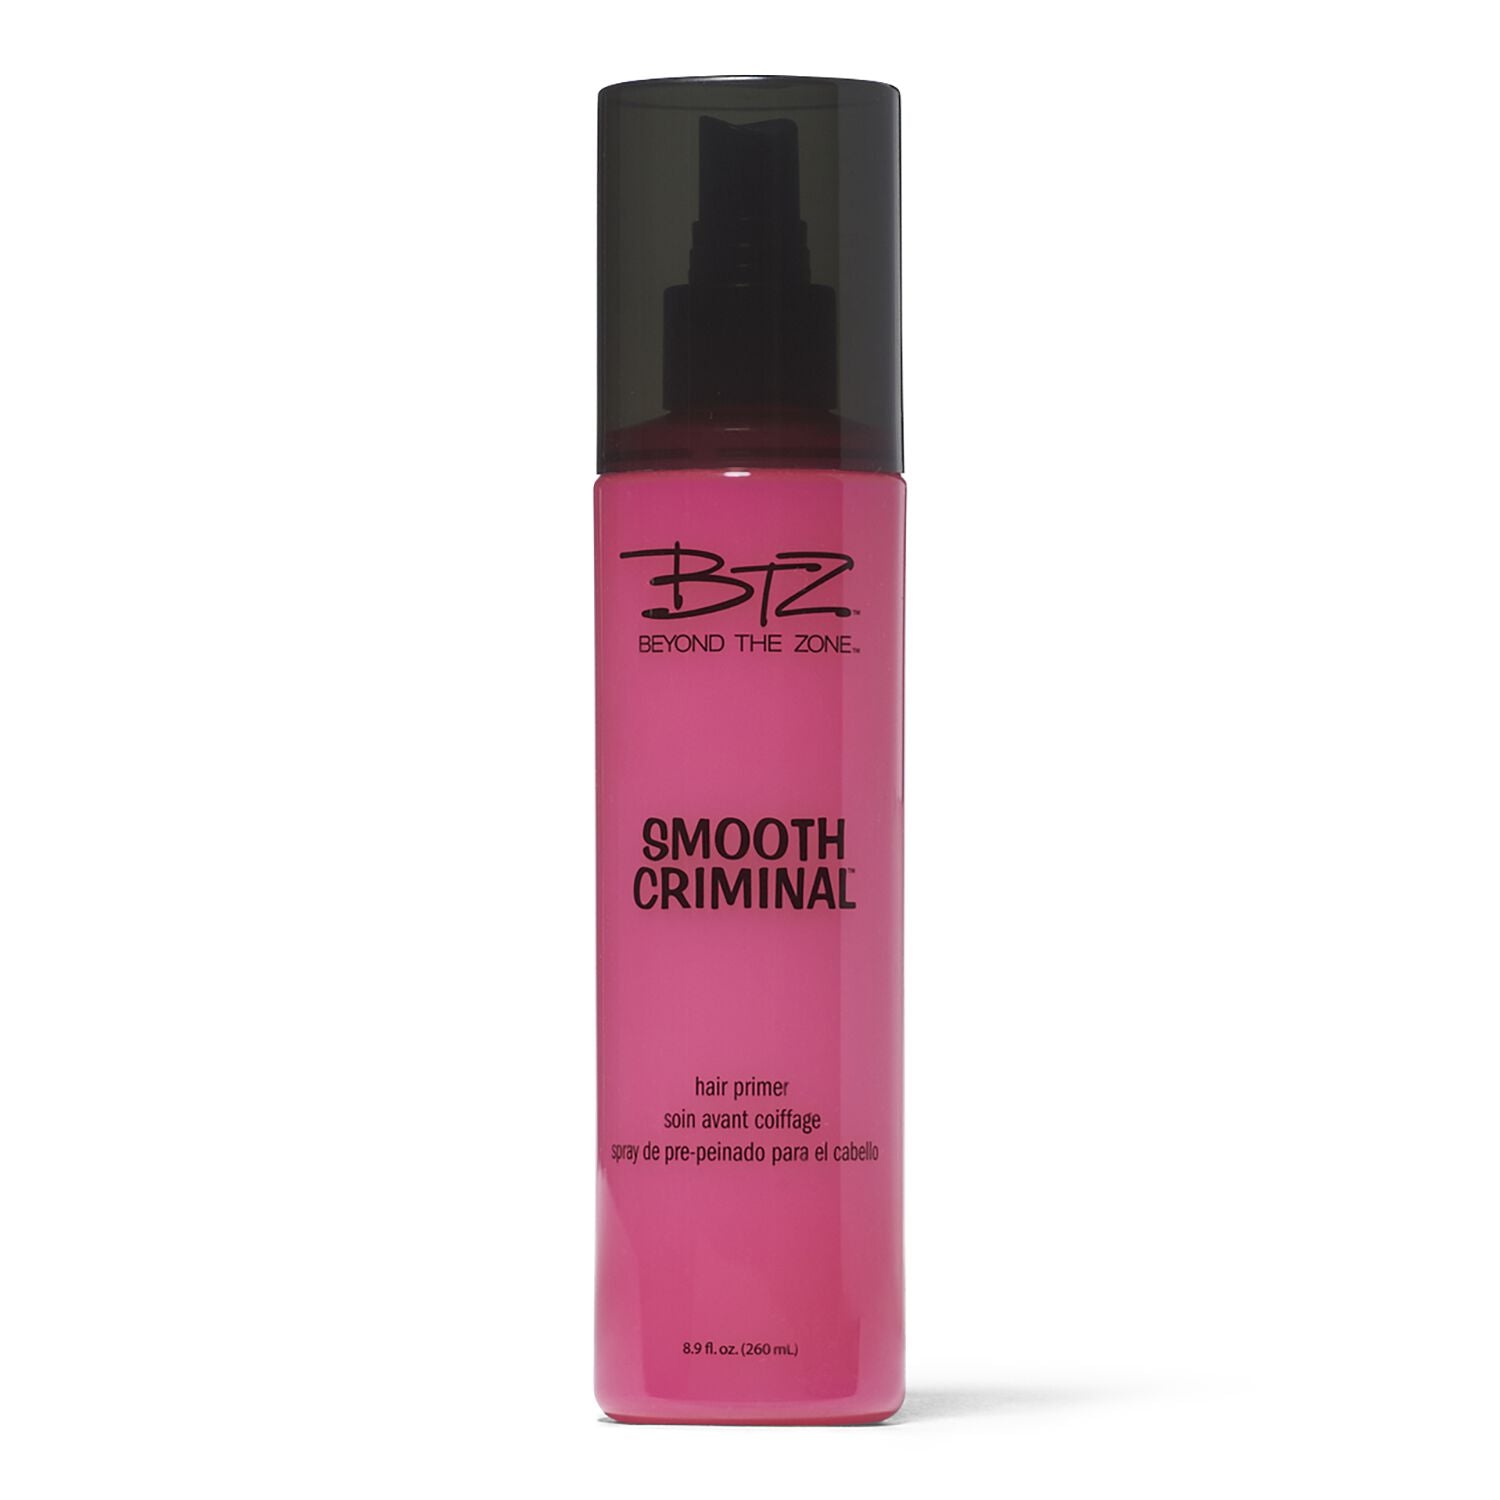 Smooth Criminal  by   Beyond the Zone Hair Primer